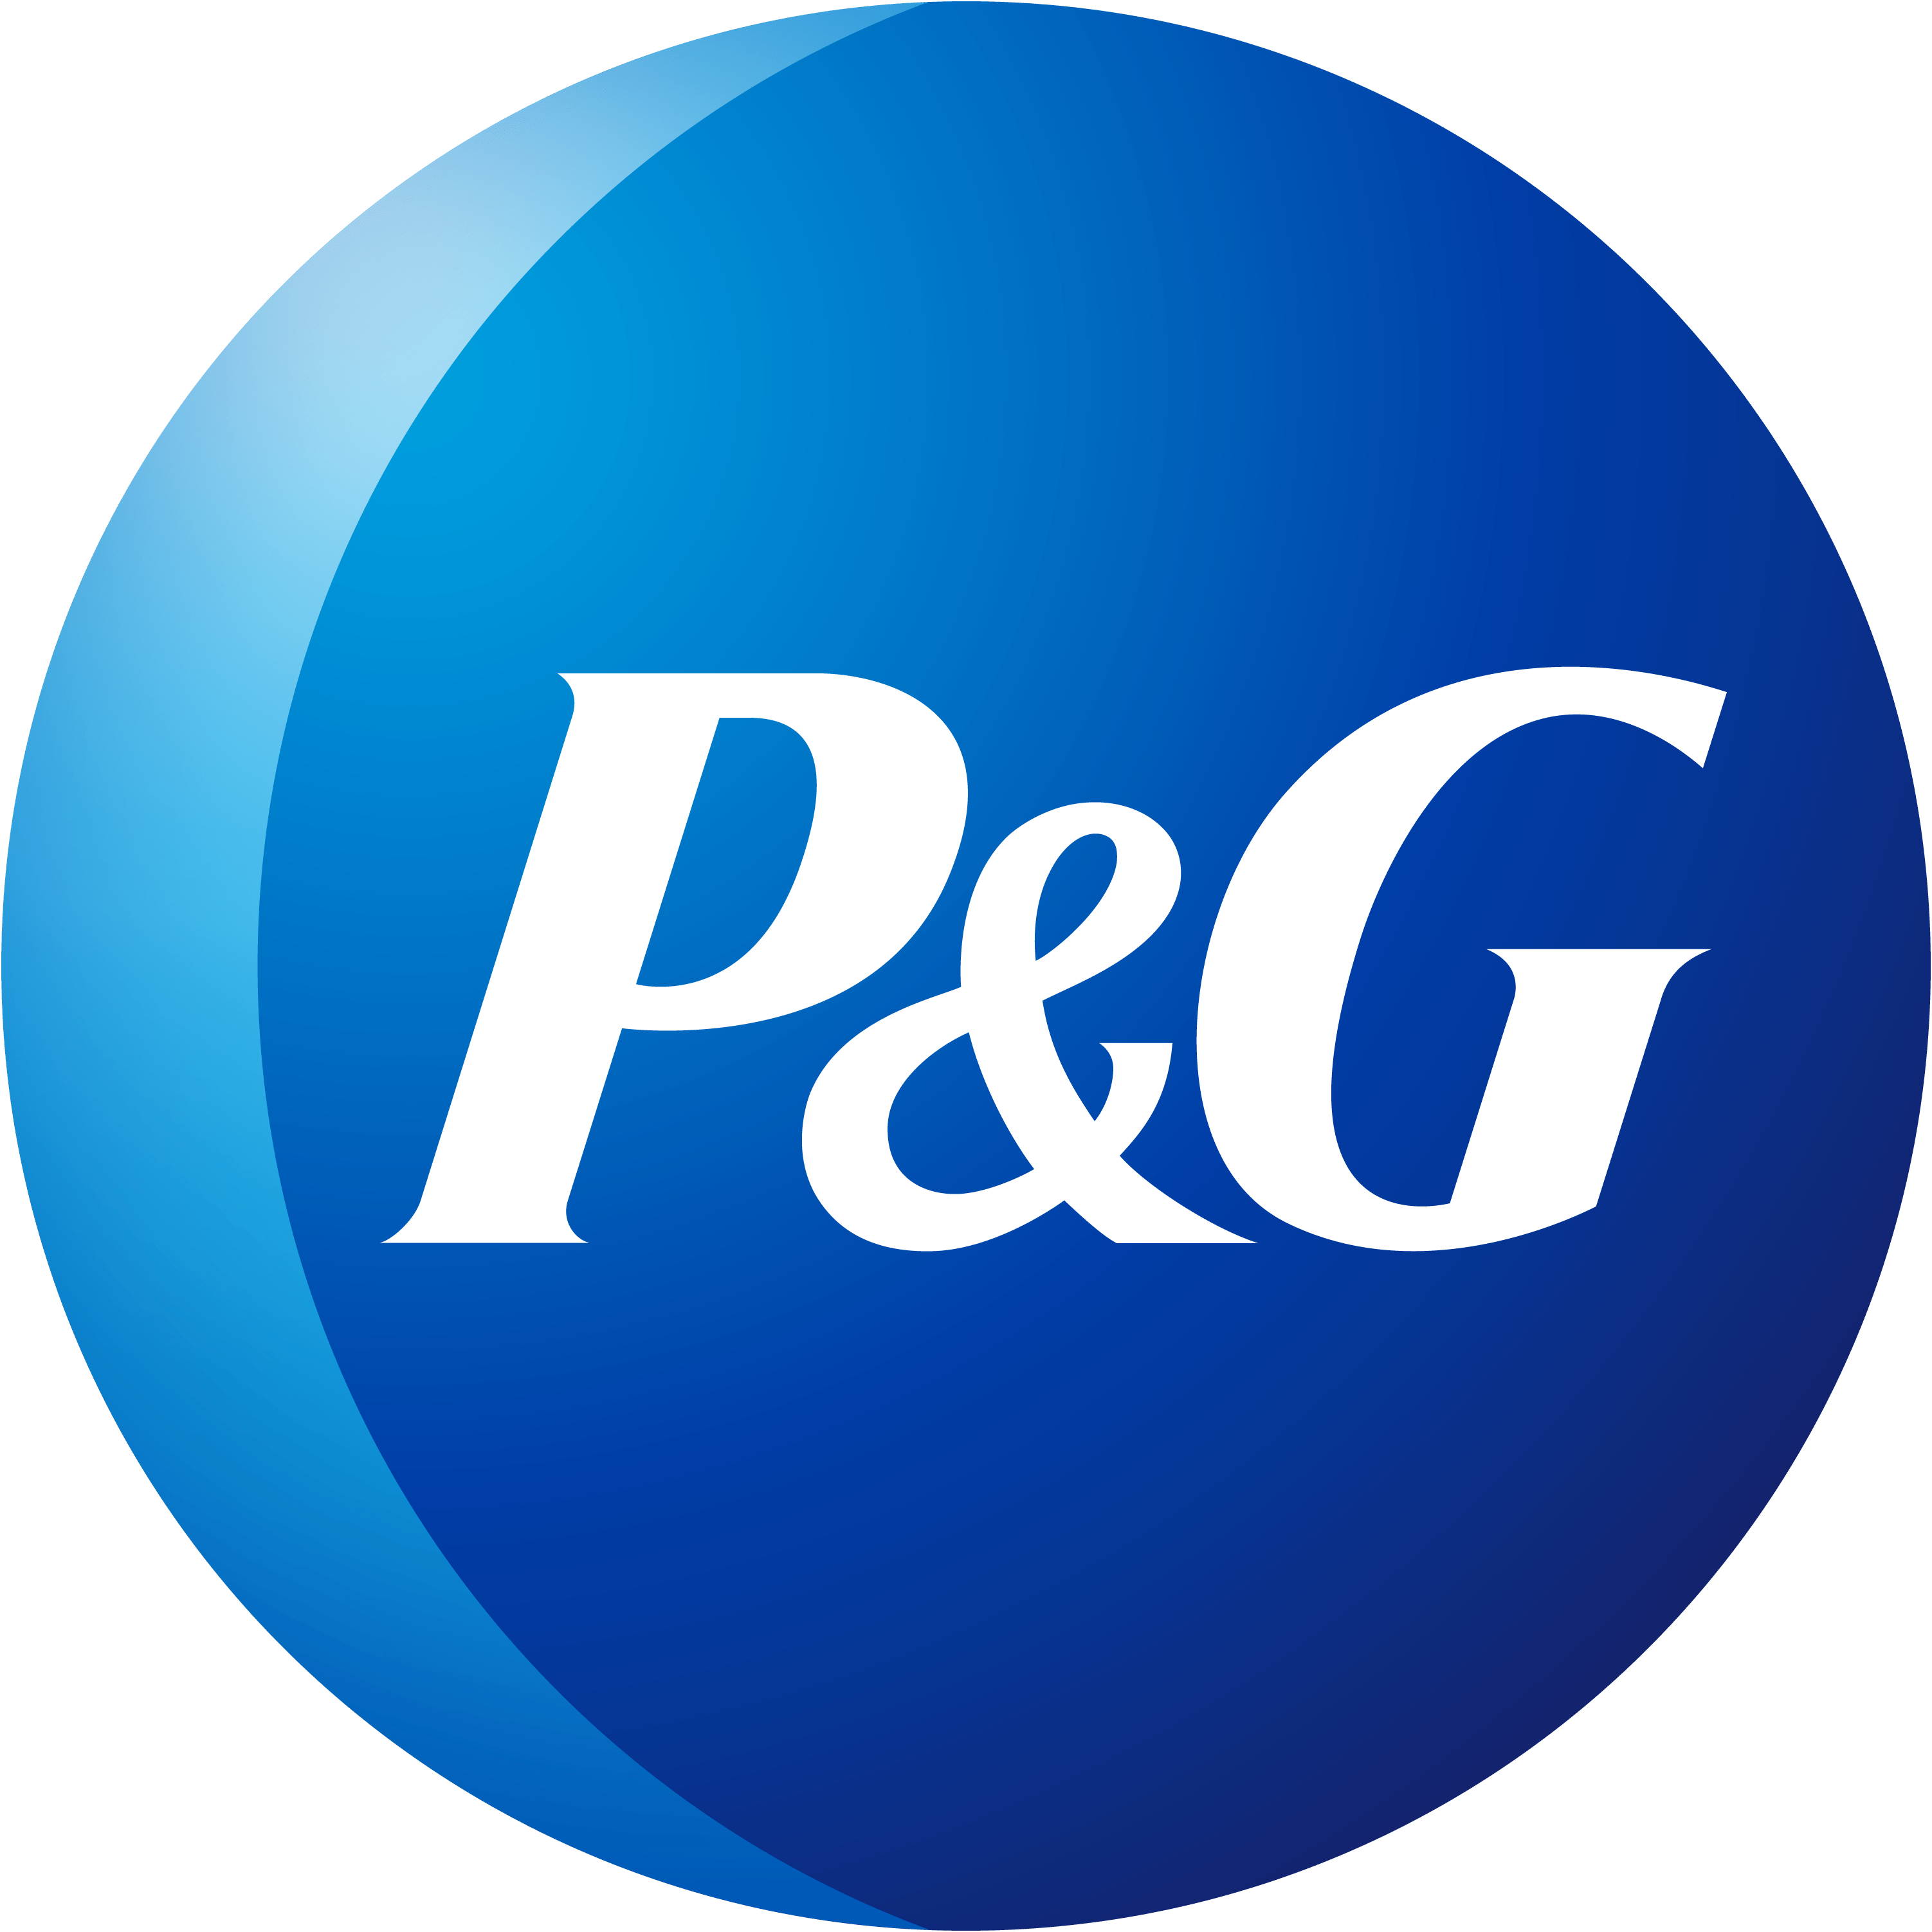 US-based Personal Care Manufacturer Logo - Procter & Gamble Company